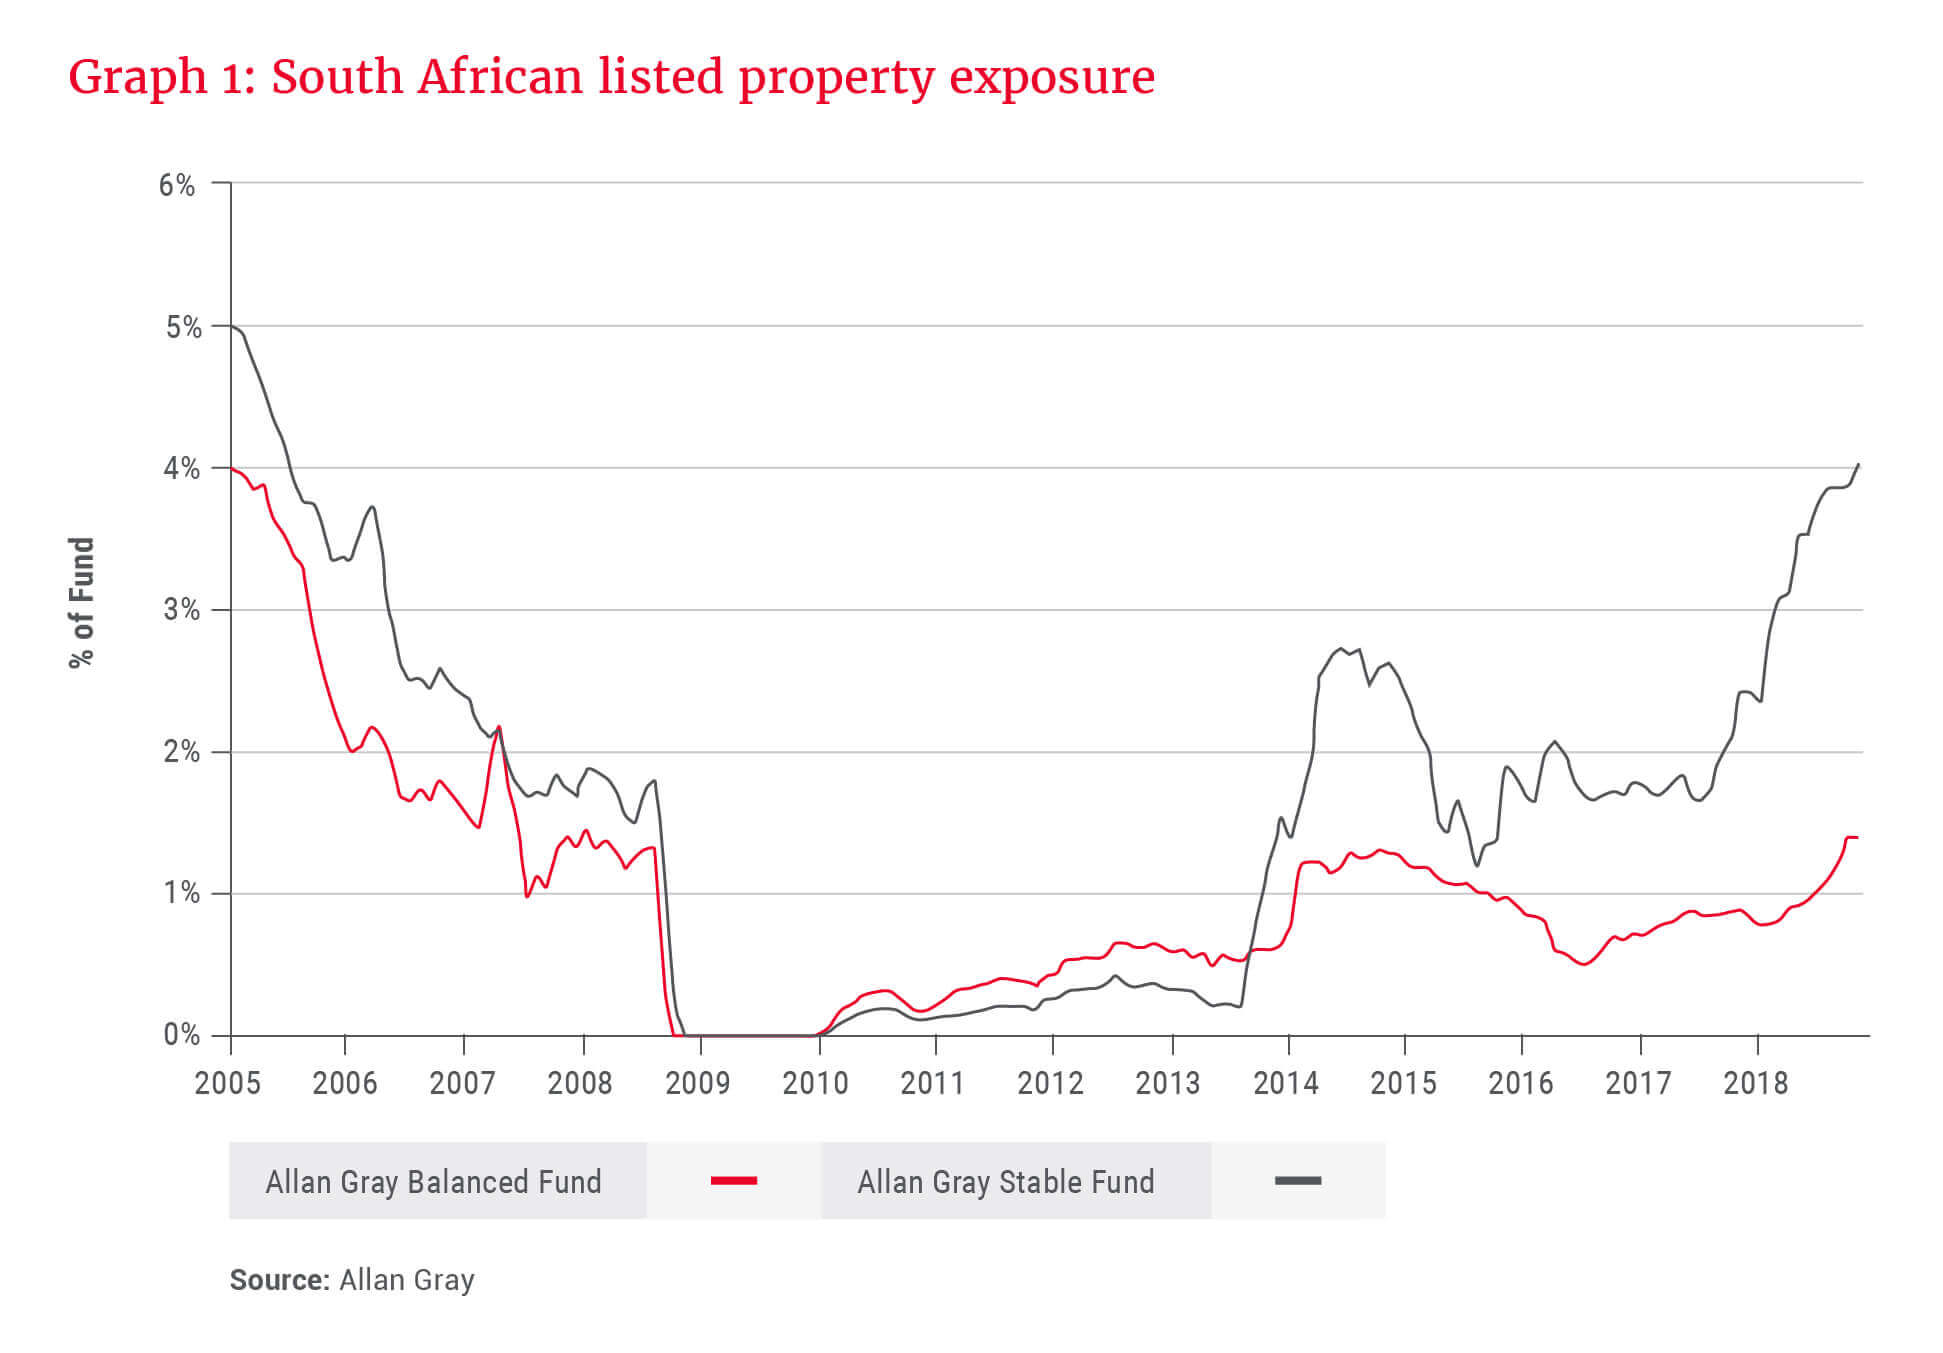 South African listed property exposure - Allan Gray